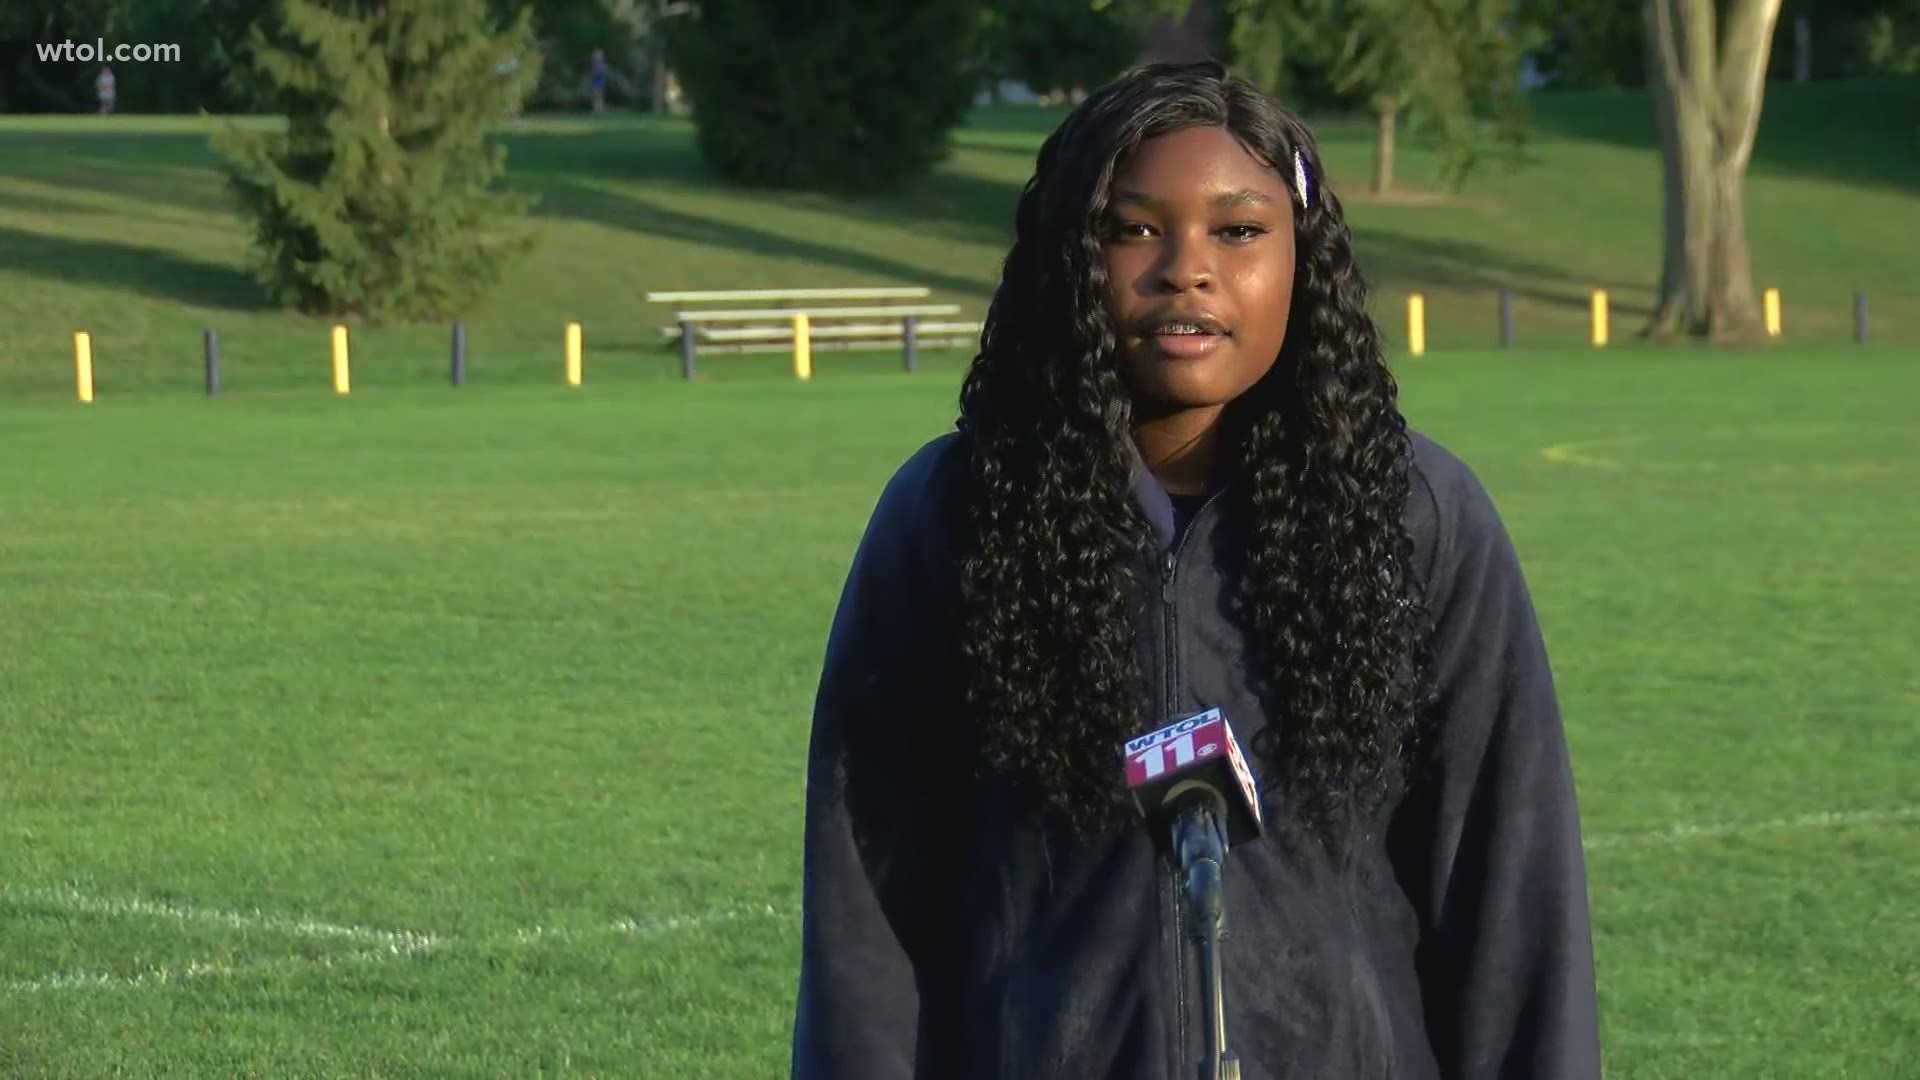 One of the top girls basketball players in northwest Ohio, Madison Royal-Davis, went live on WTOL with Jordan Strack to announce the decision.